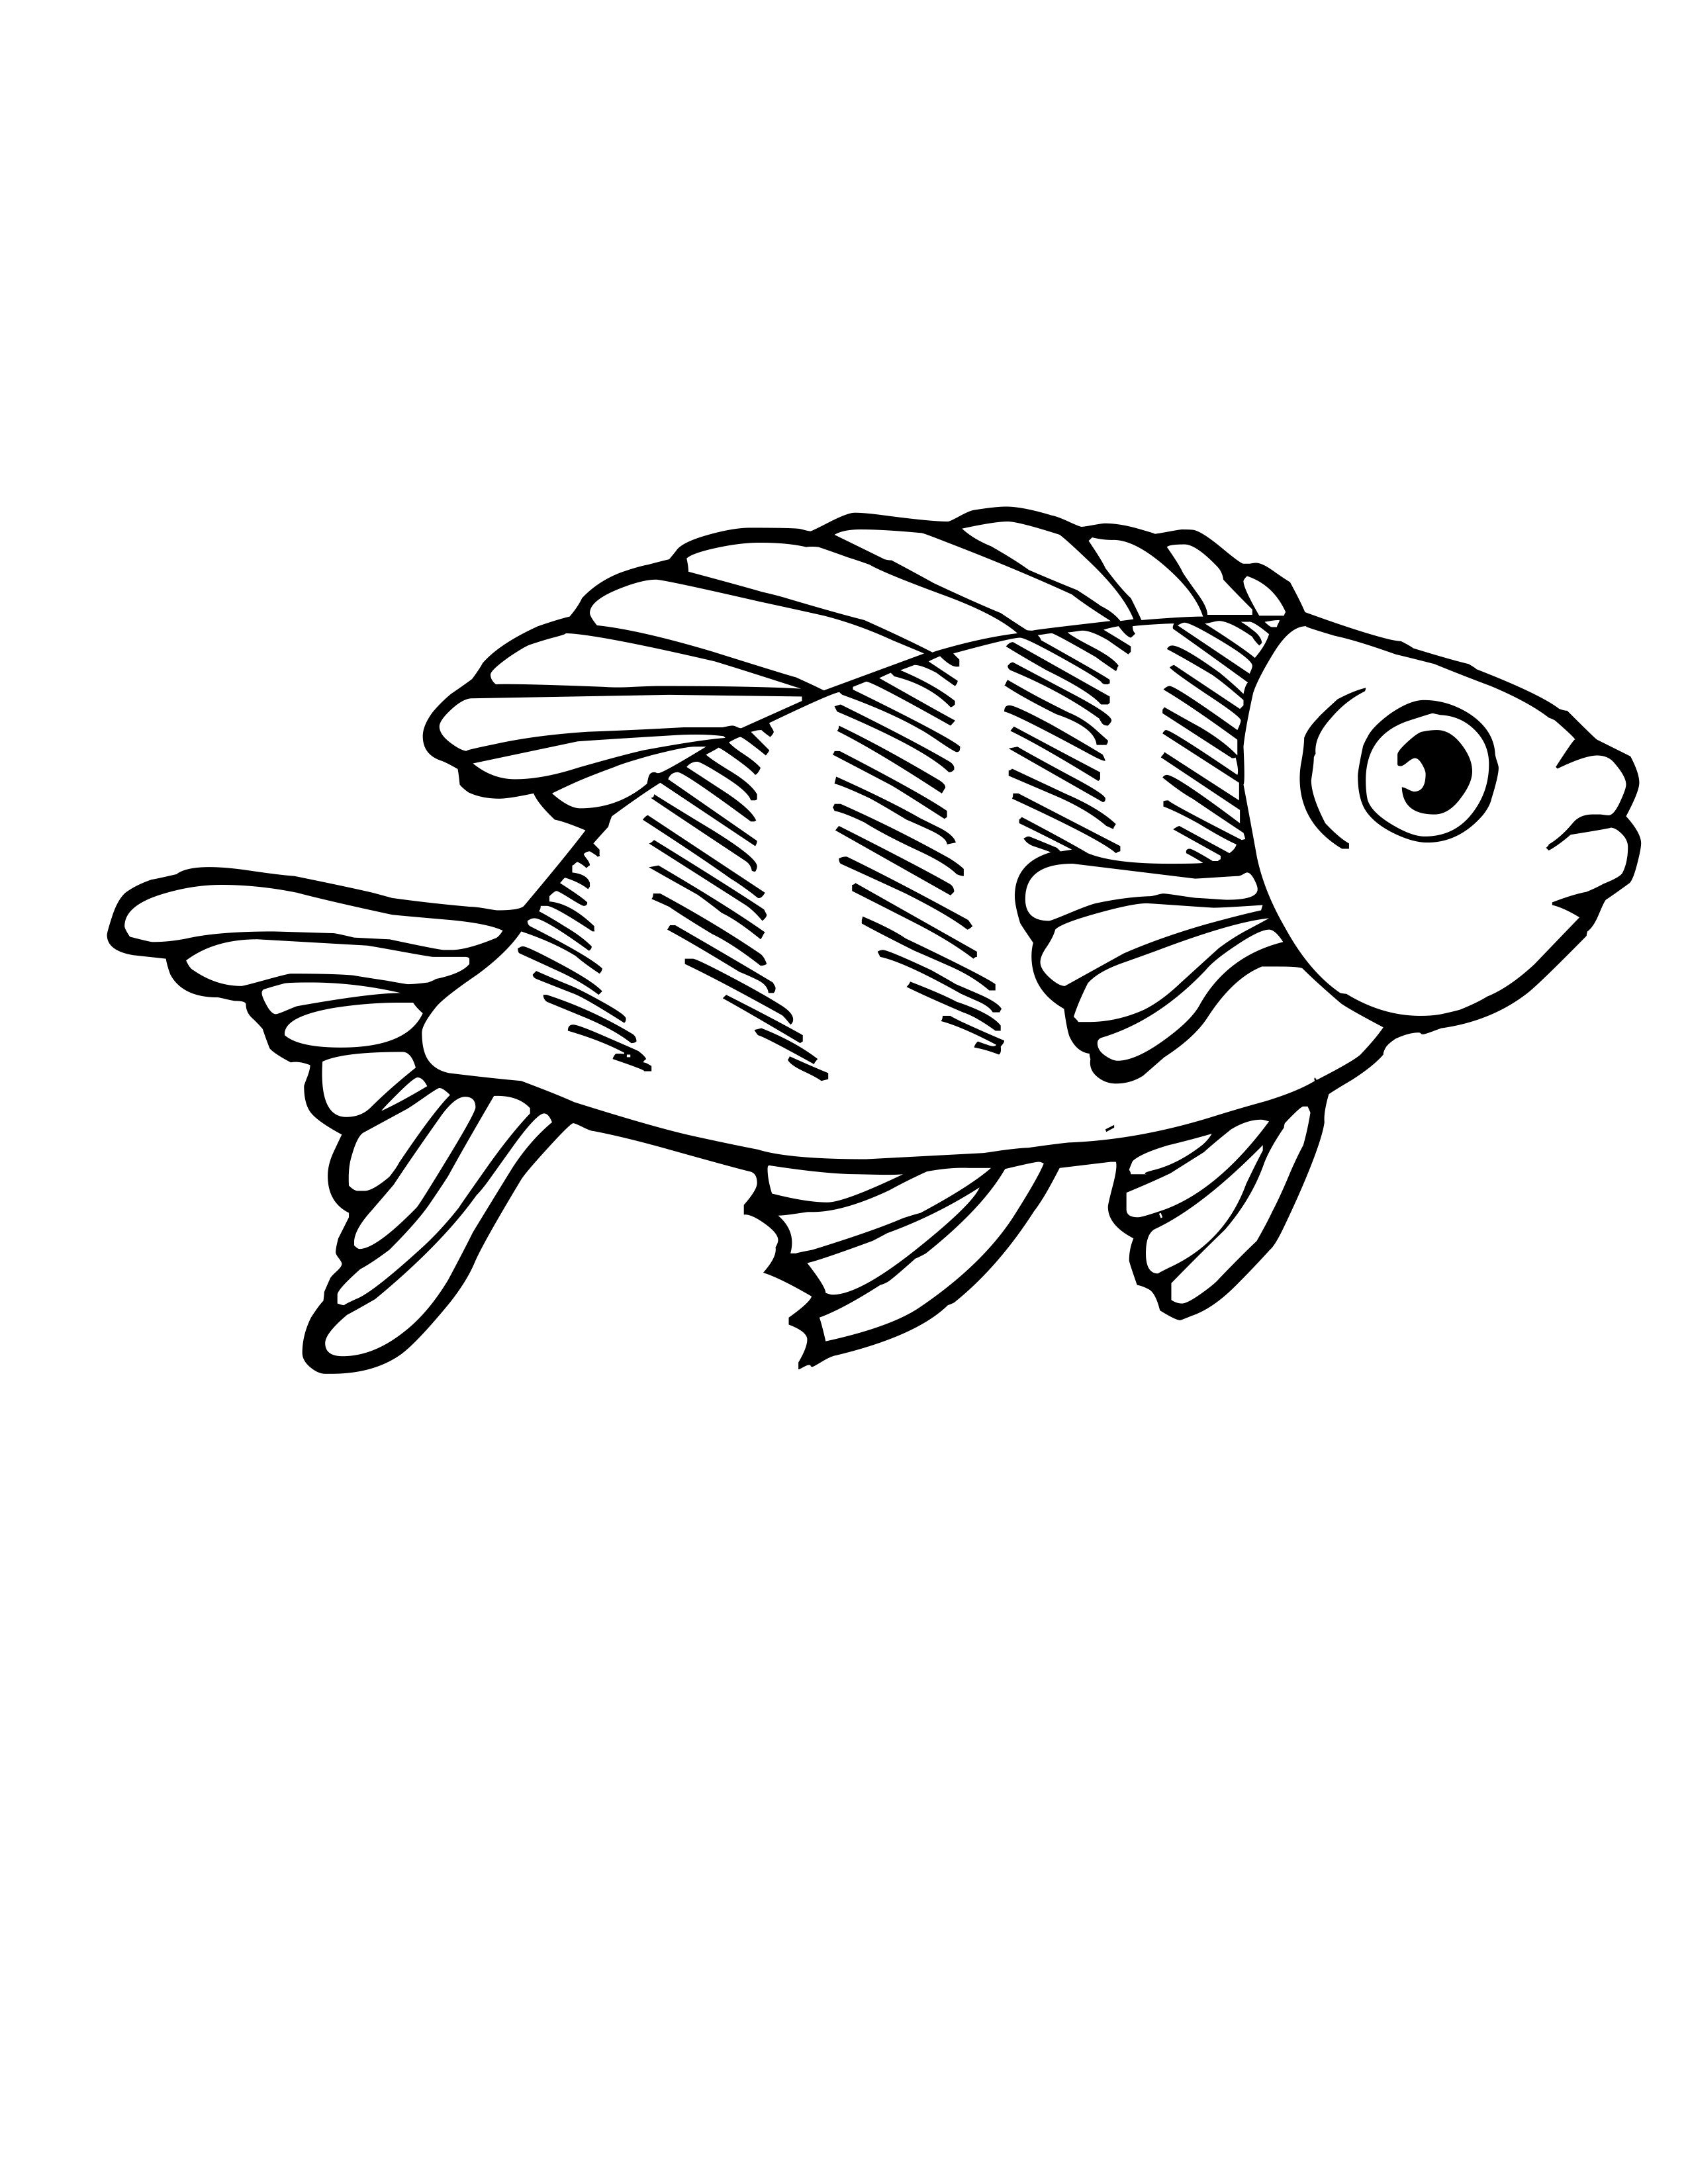 Cod Fish Coloring Pages at GetDrawings | Free download